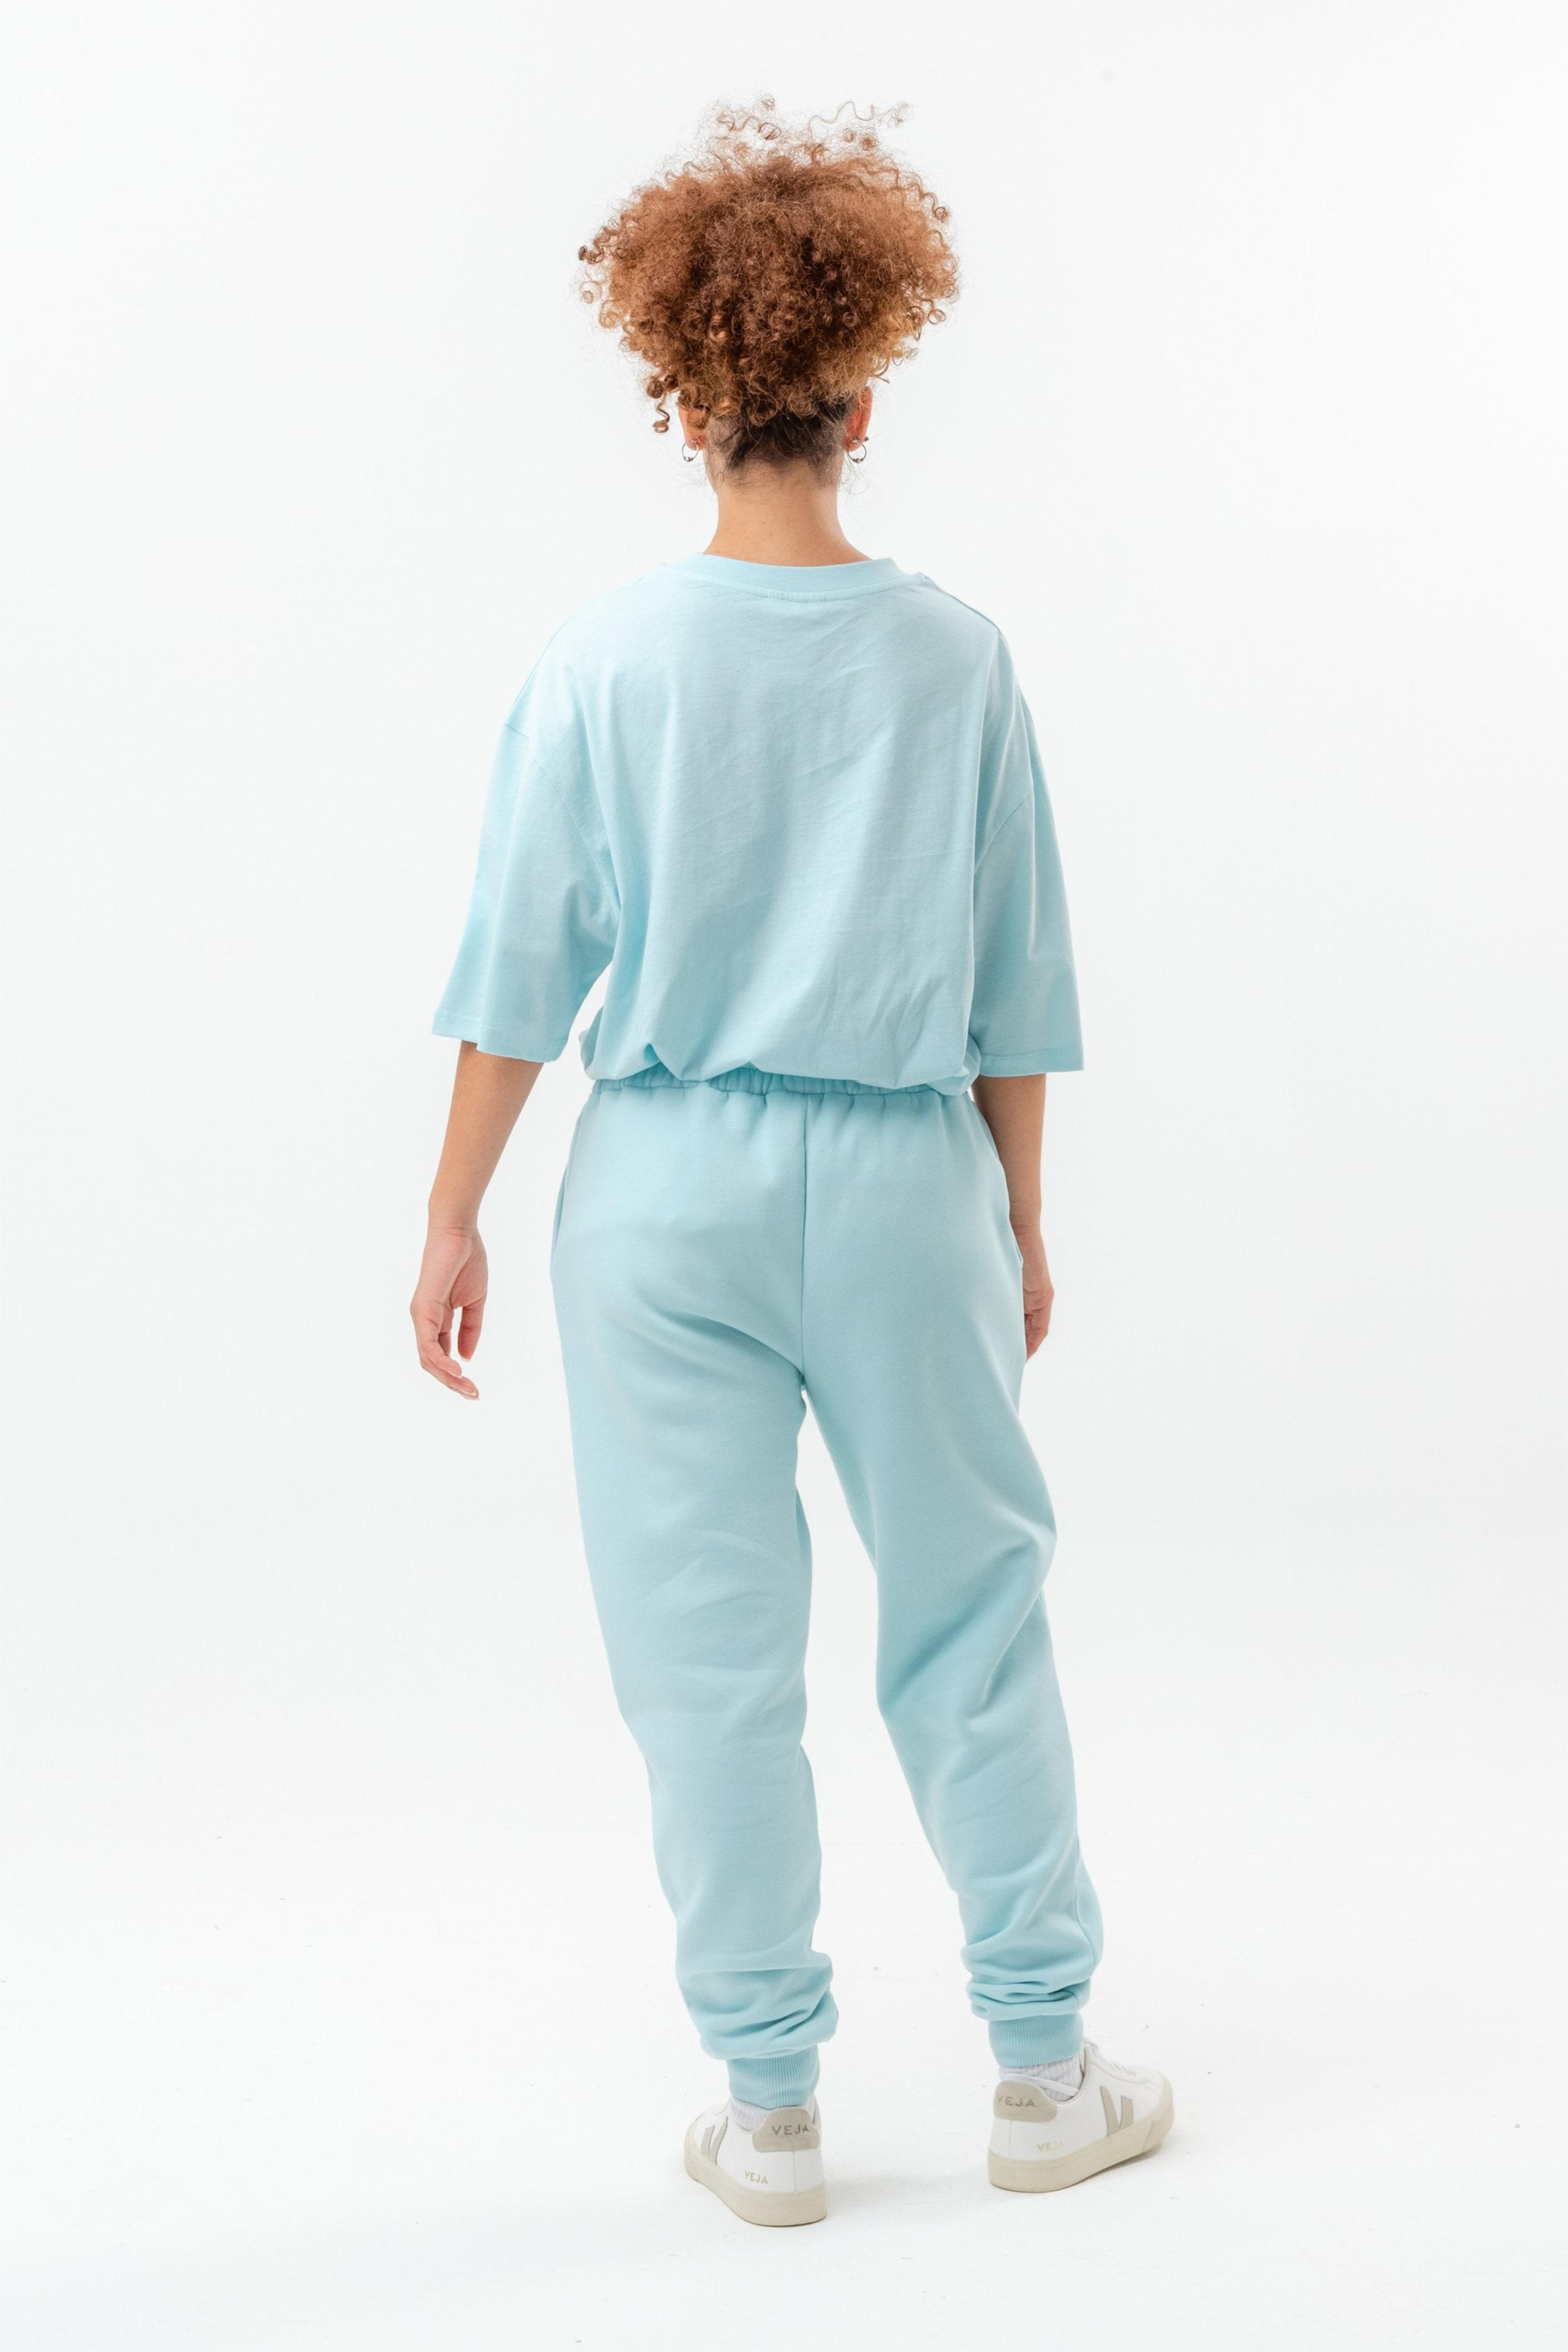 Alternate View 5 of CONTINU8 PALE BLUE OVERSIZED T-SHIRT